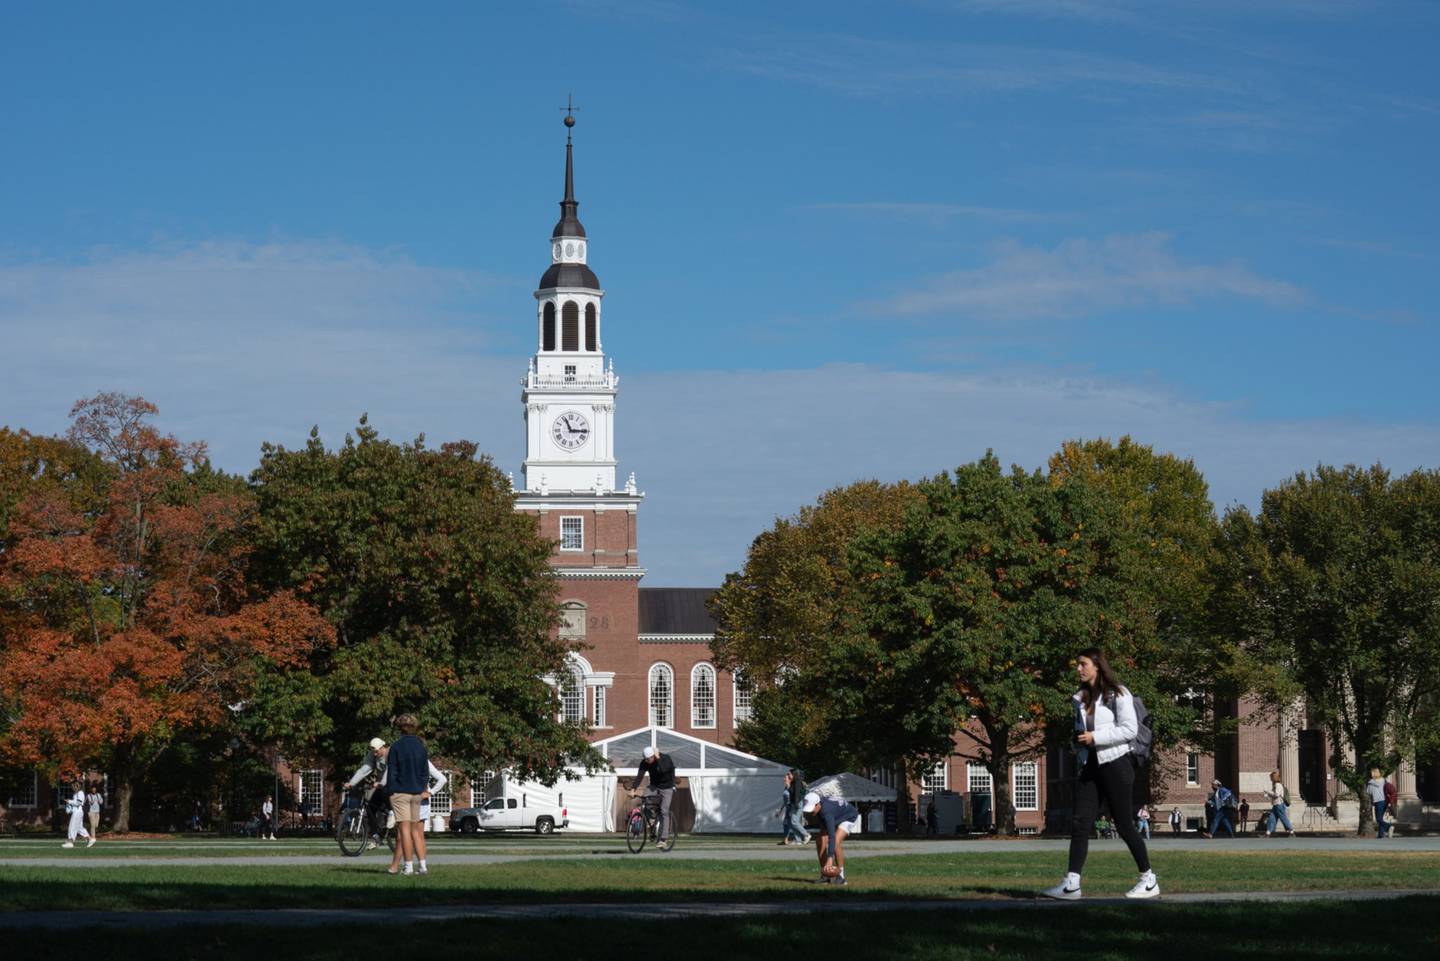 Baker-Berry Library on the campus of Dartmouth College in Hanover, New Hampshire, U.S., on Friday, Oct. 15, 2021.